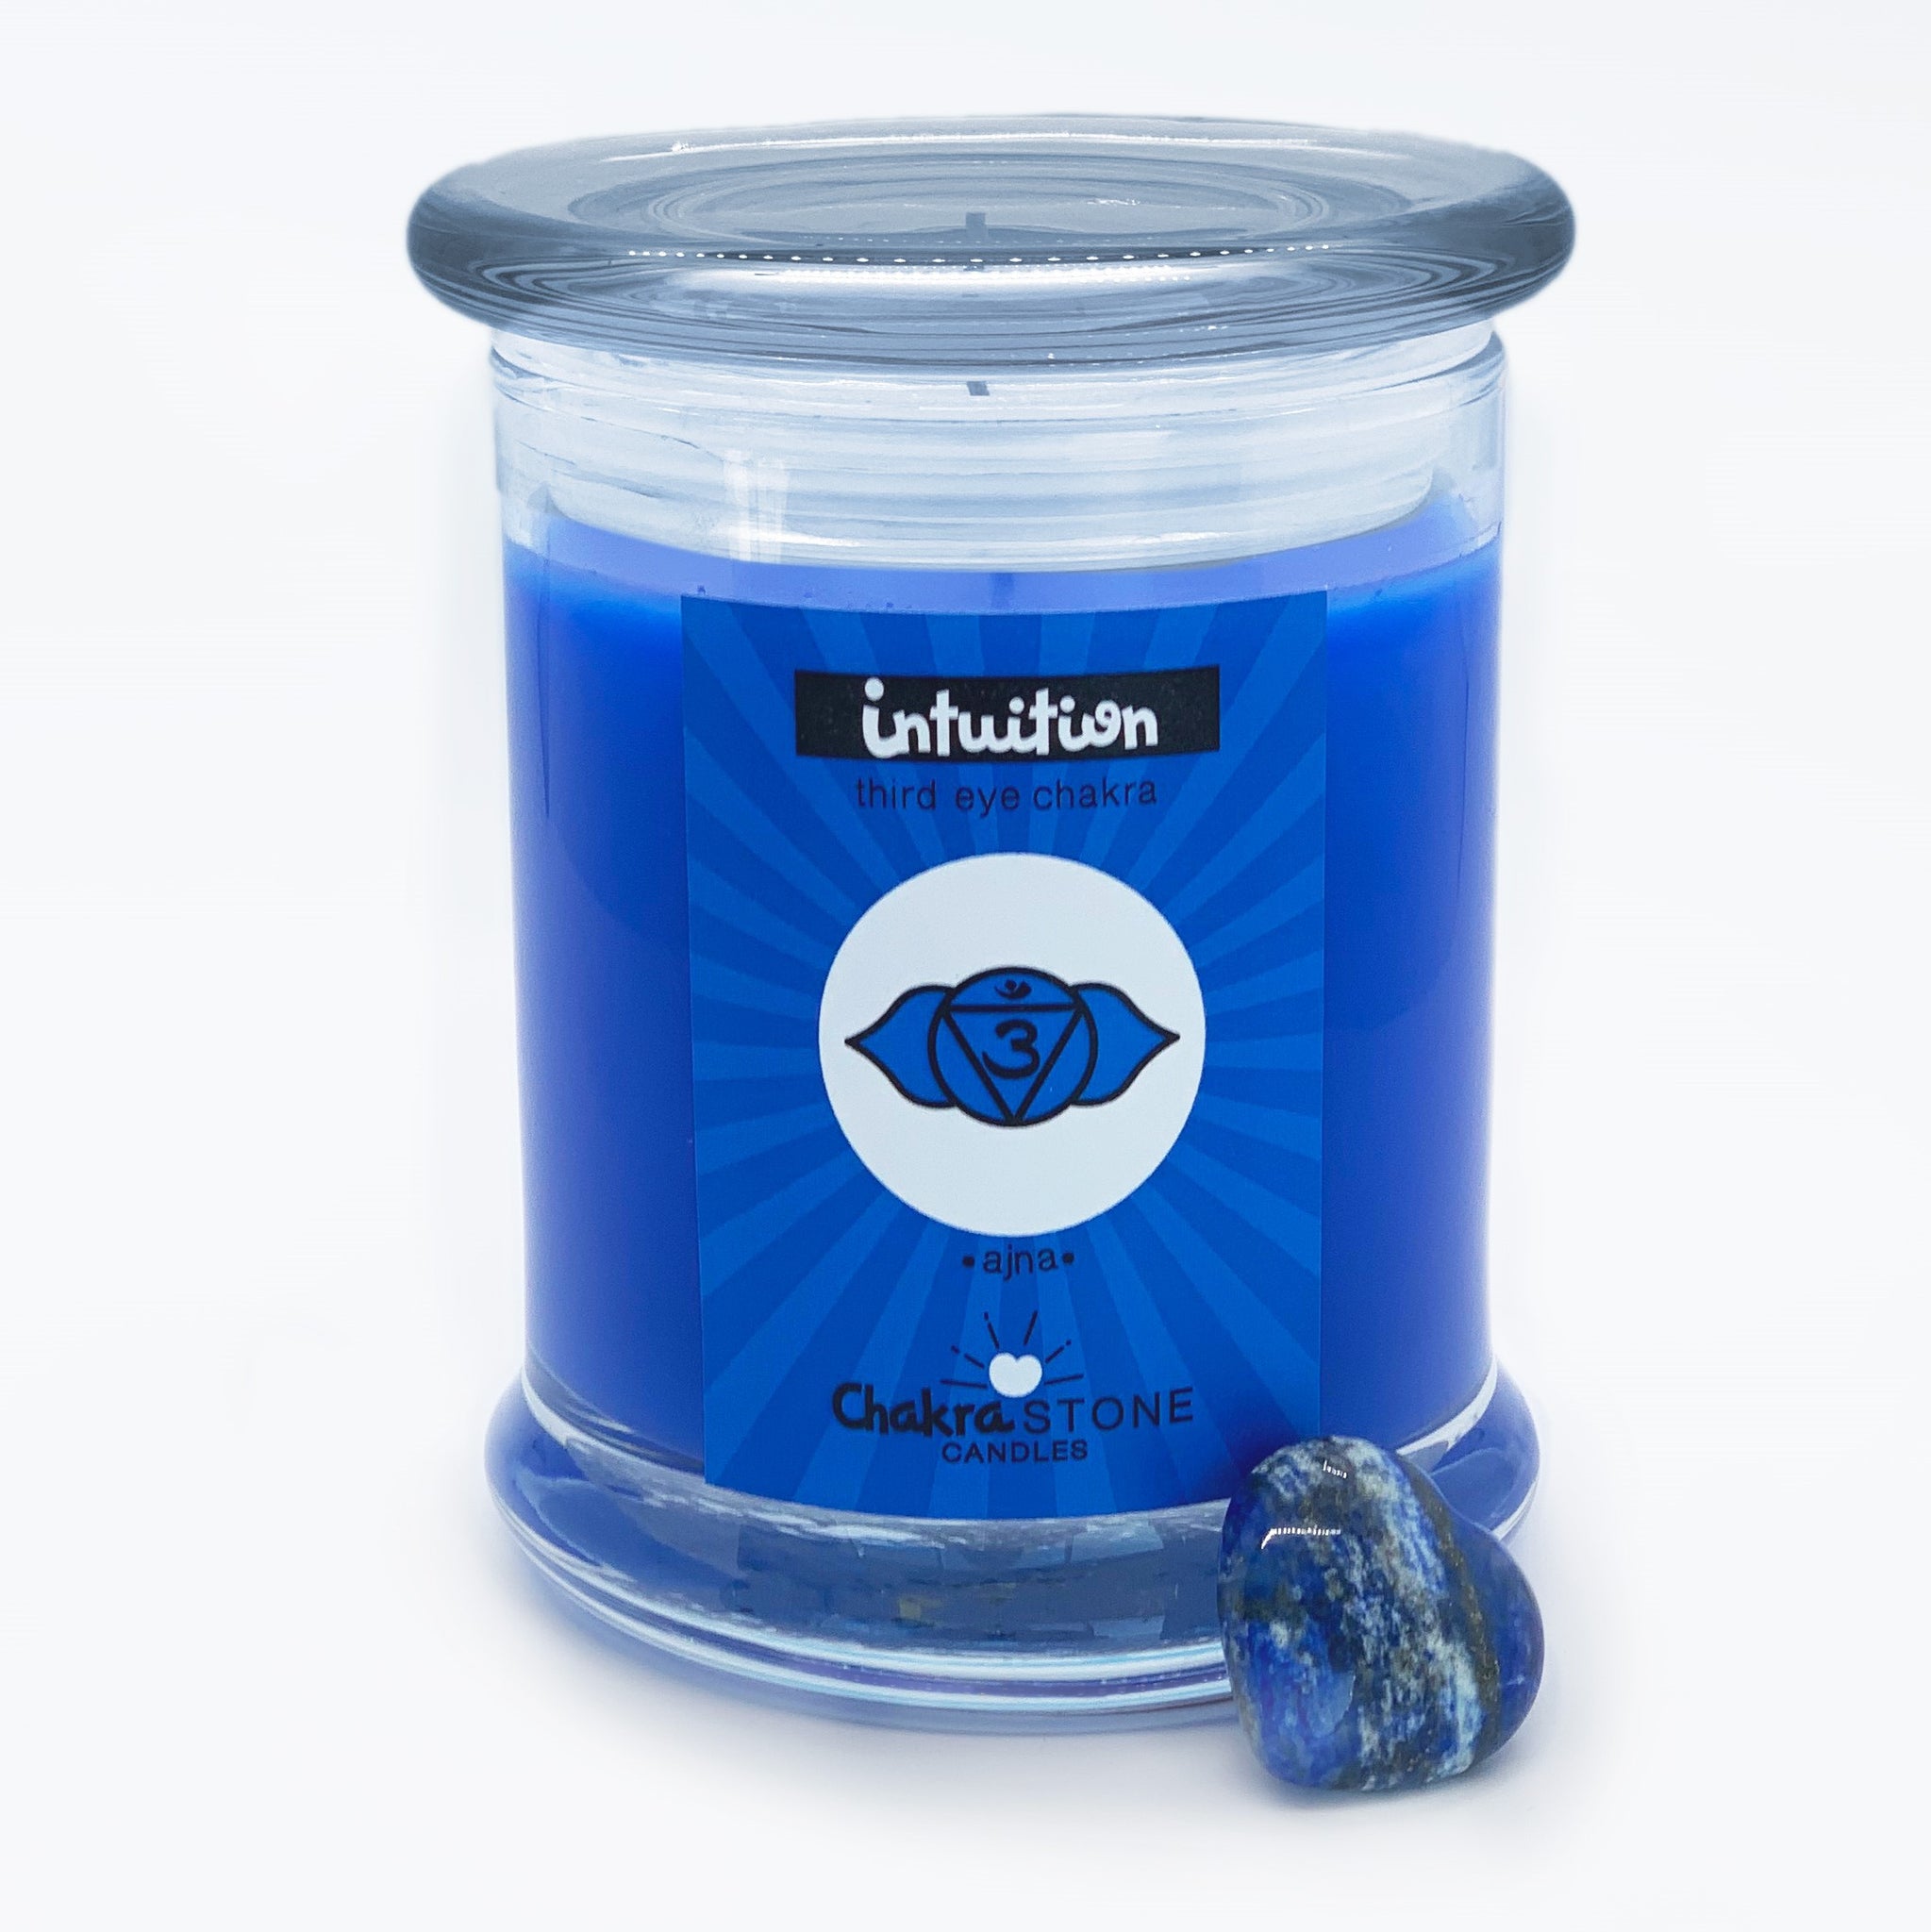 Intuition - Third Eye Chakra Candle